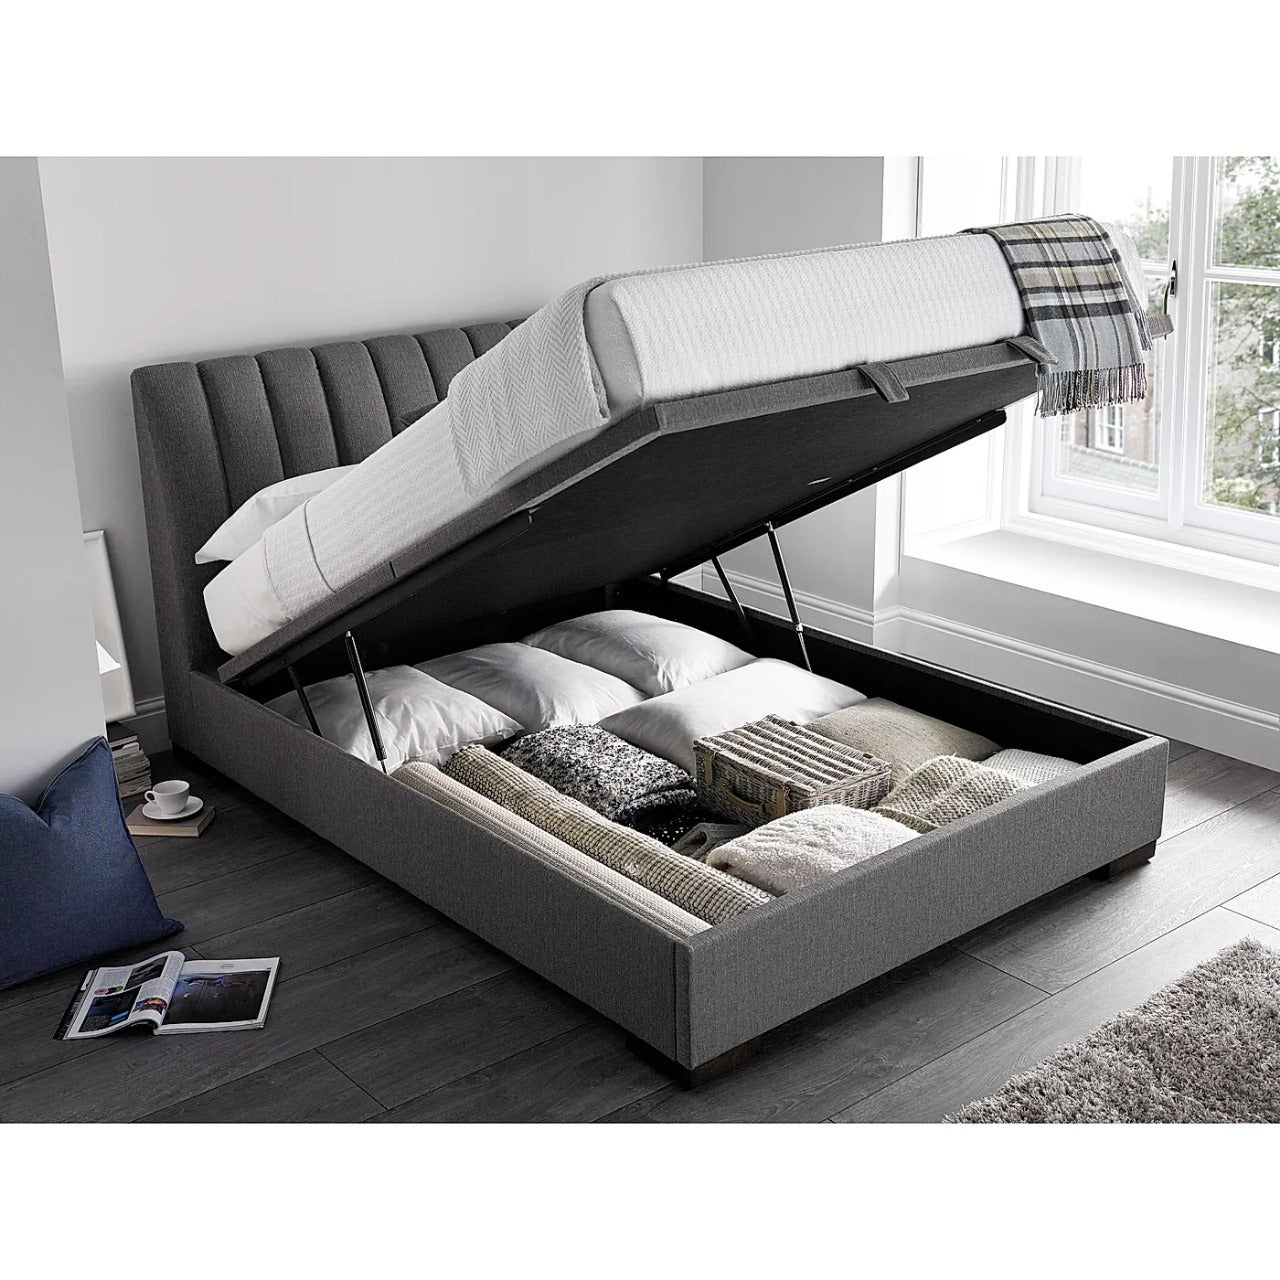  King Size Bed: Grey King Size Double Bed